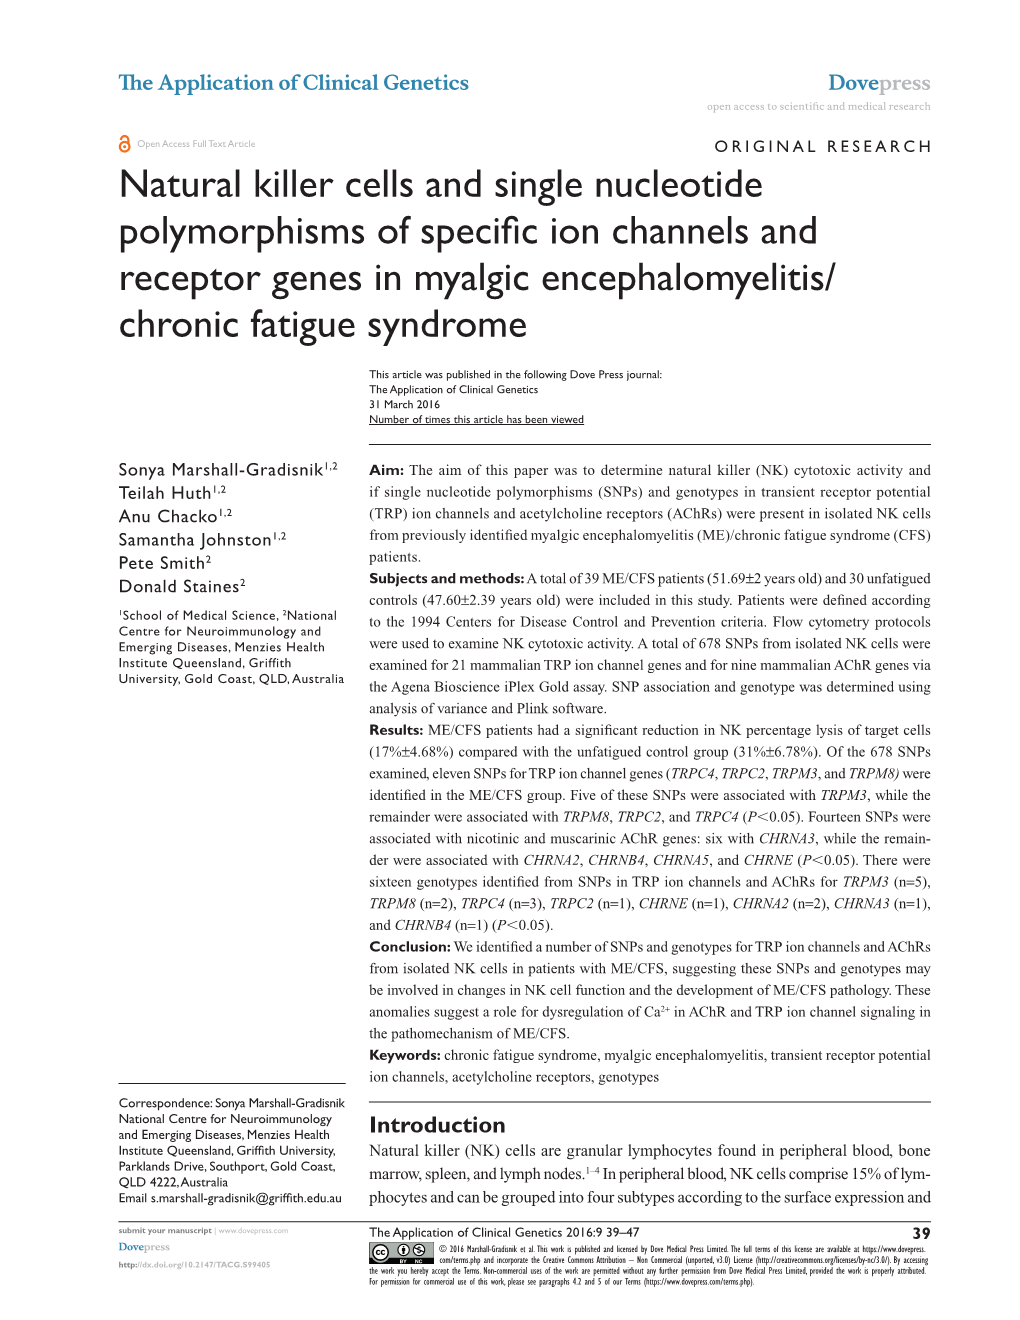 Natural Killer Cells and Single Nucleotide Polymorphisms of Specific Ion Channels and Receptor Genes in Myalgic Encephalomyelitis/ Chronic Fatigue Syndrome